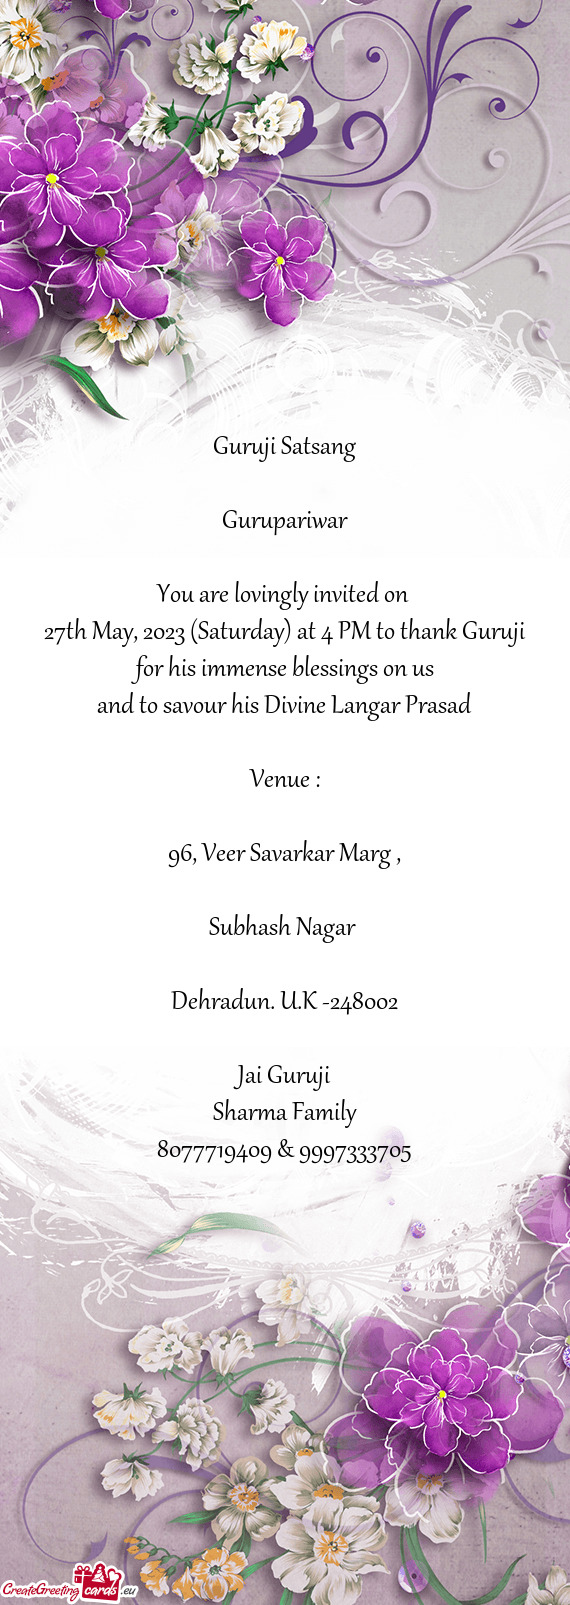 27th May, 2023 (Saturday) at 4 PM to thank Guruji for his immense blessings on us